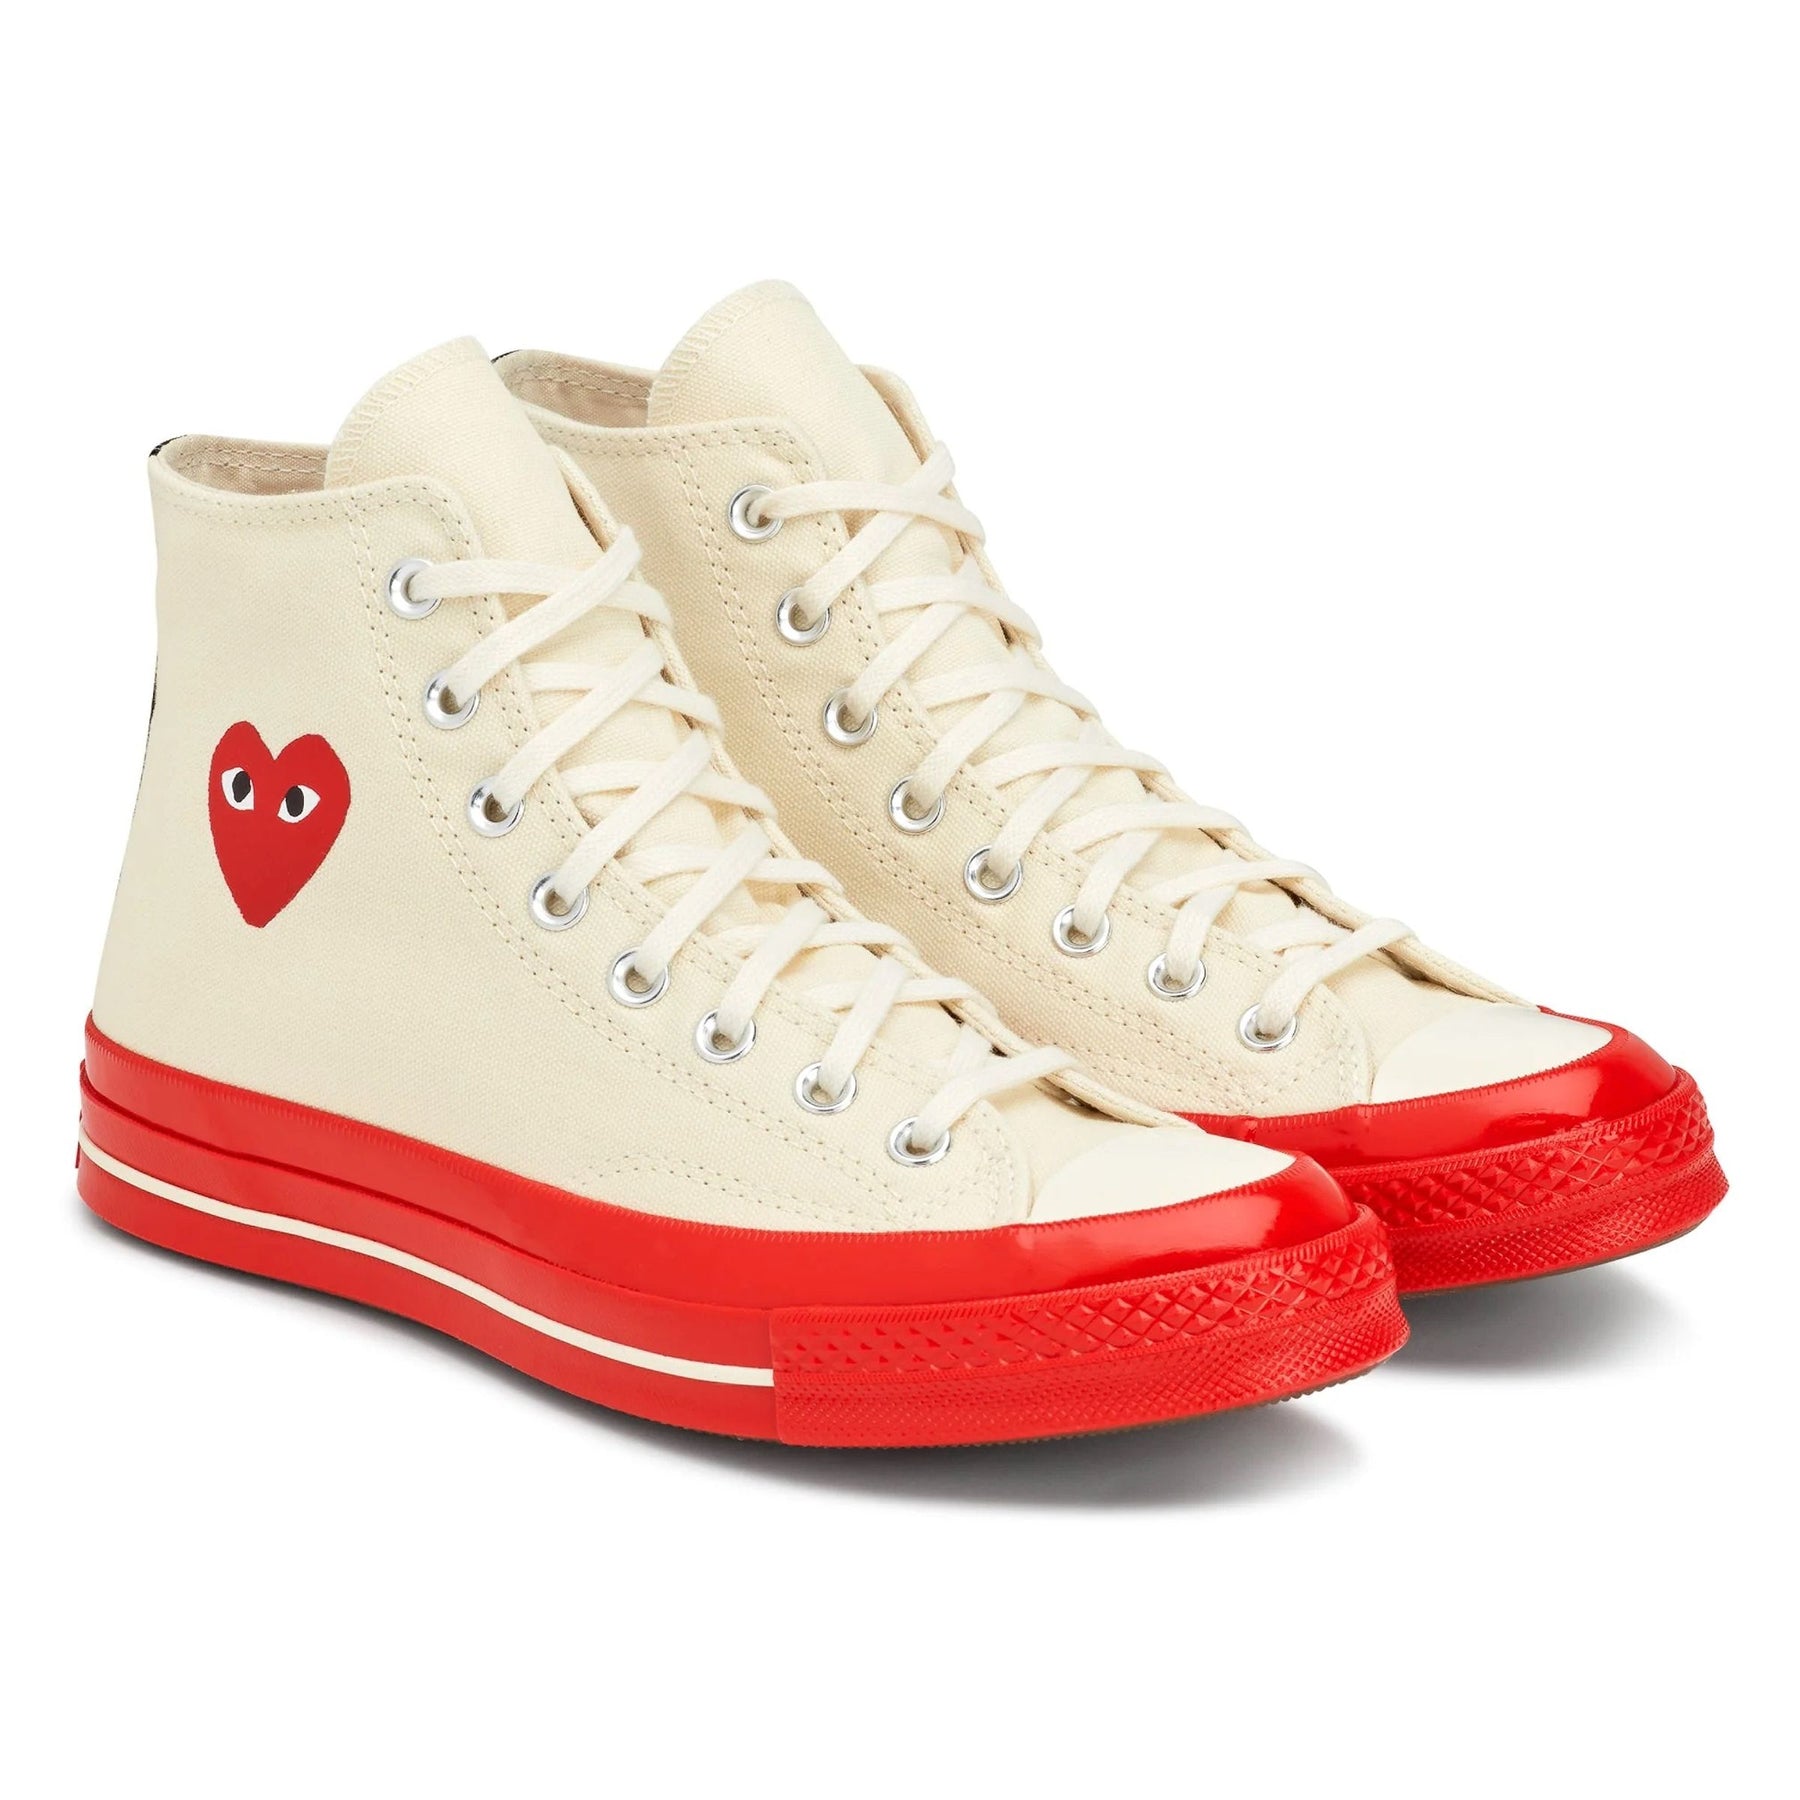 CDG-PLAY Converse - Red Top-AZ-K124-001-2-Off High atelier White Sole kids